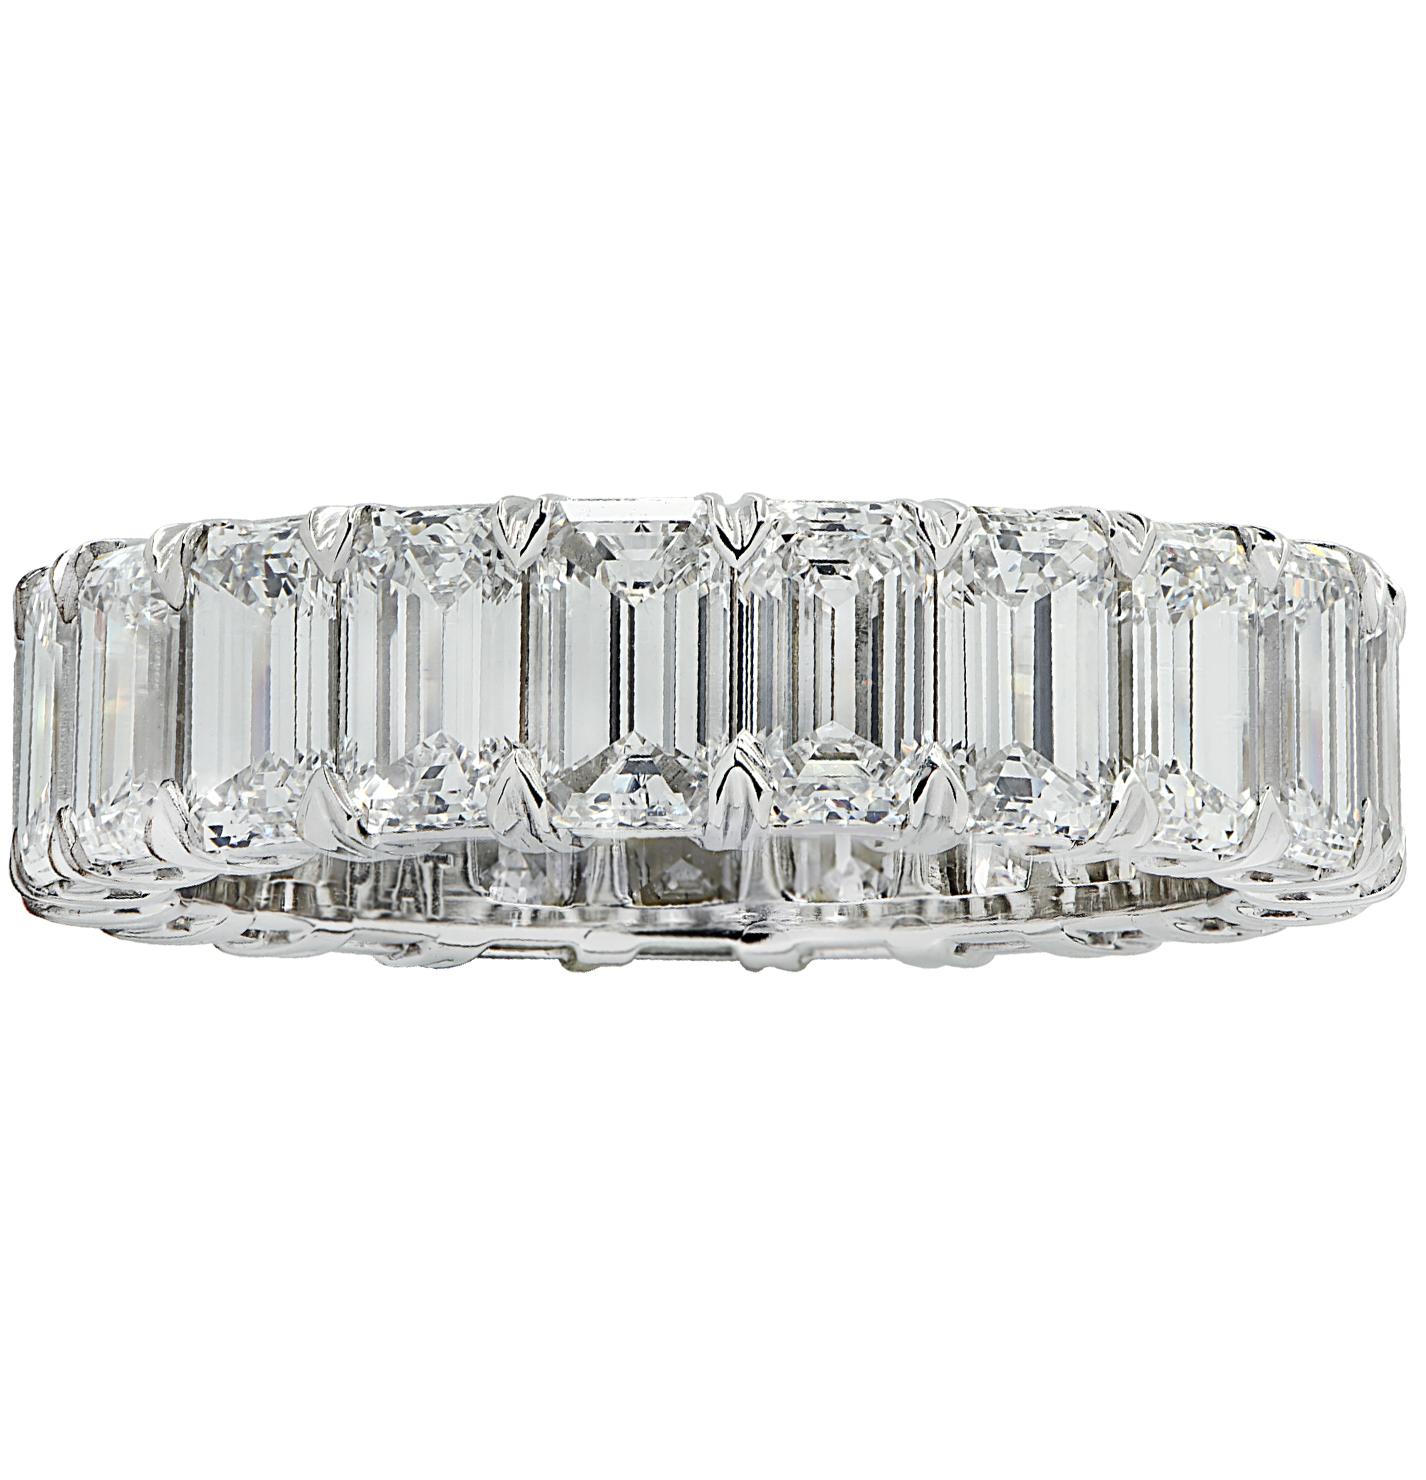 Exquisite Vivid Diamonds eternity band crafted in Platinum, showcasing 21 stunning emerald cut diamonds weighing 6.45 carats total, D-F color, VVS-VS clarity. Each diamond was carefully selected, perfectly matched and set in a seamless sea of